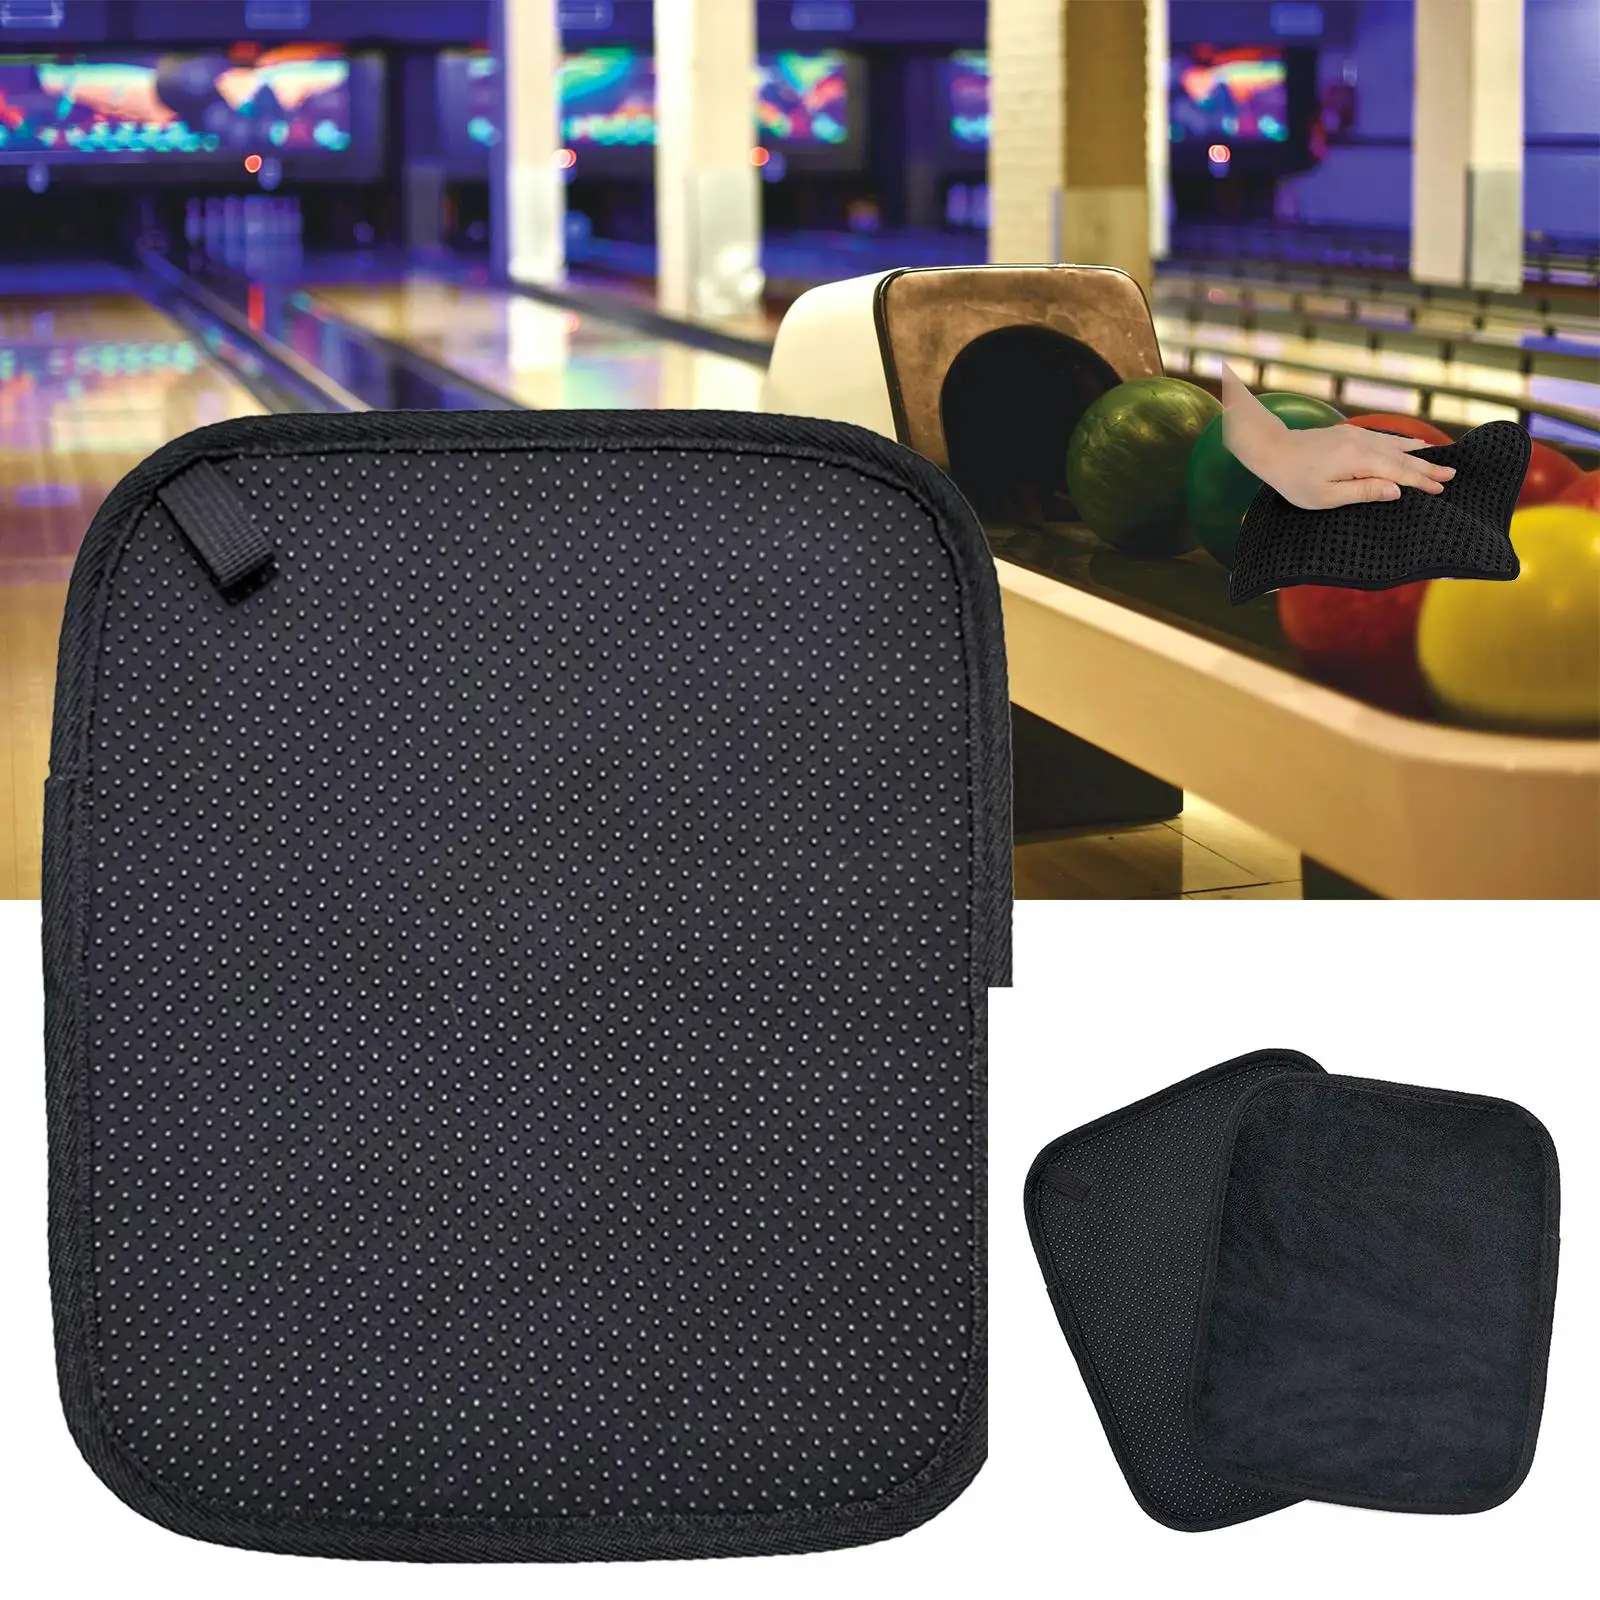 Bowling Ball Towel for Better Grip and Accuracy Bowling Shammy Pad Microfiber Bowling Towels Cleaner Ball Polisher 20.5cmx25.5cm